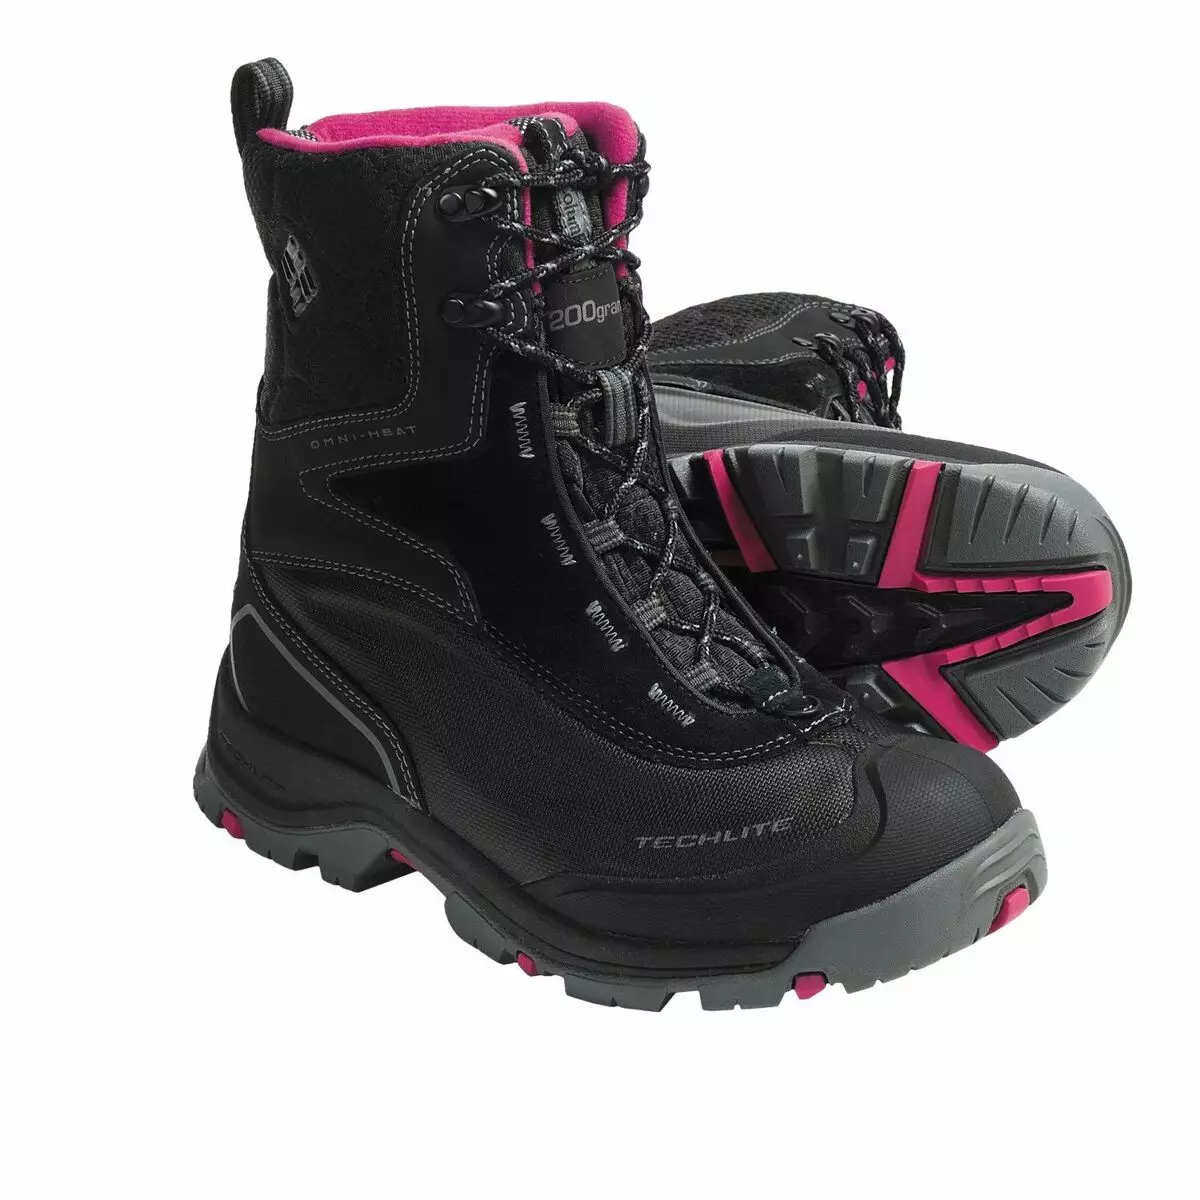 Kombia boots (64 photos): Women's winter and insulated children's models for girls Bugaboot and Minx, COLUMBIA reviews 2268_61